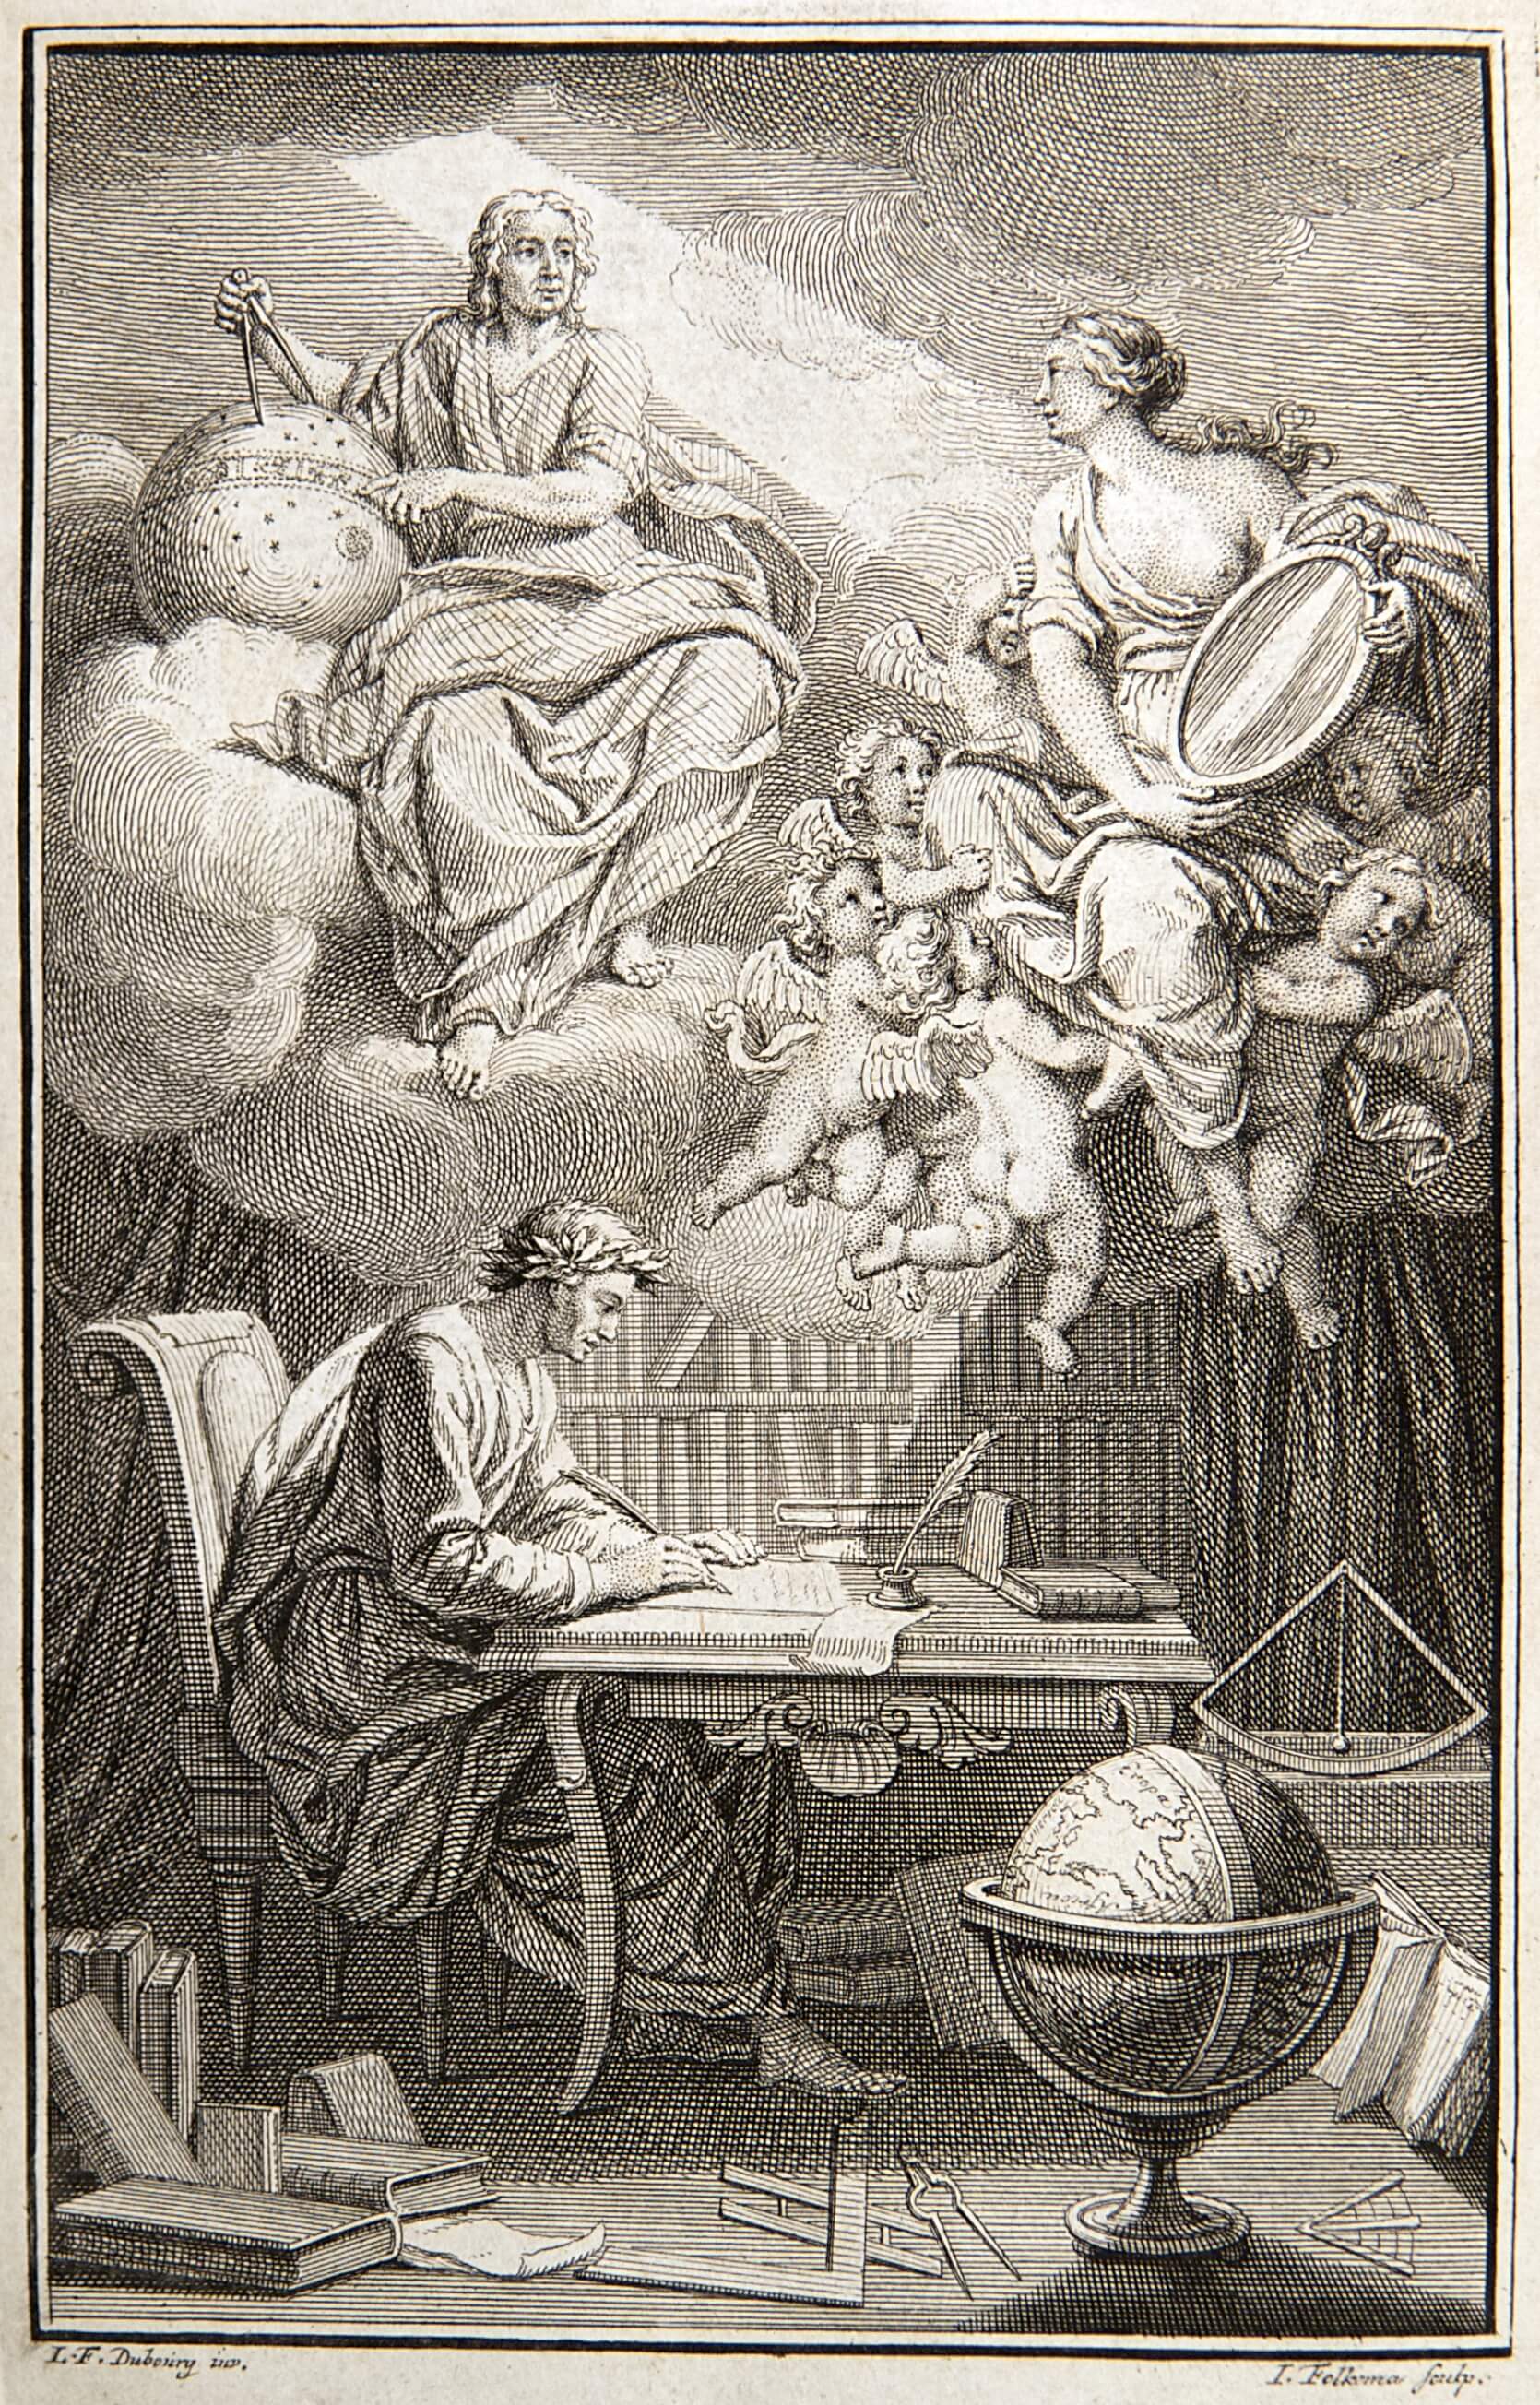 An illustration of Valtaire sitting at a desk writing, with angels above him